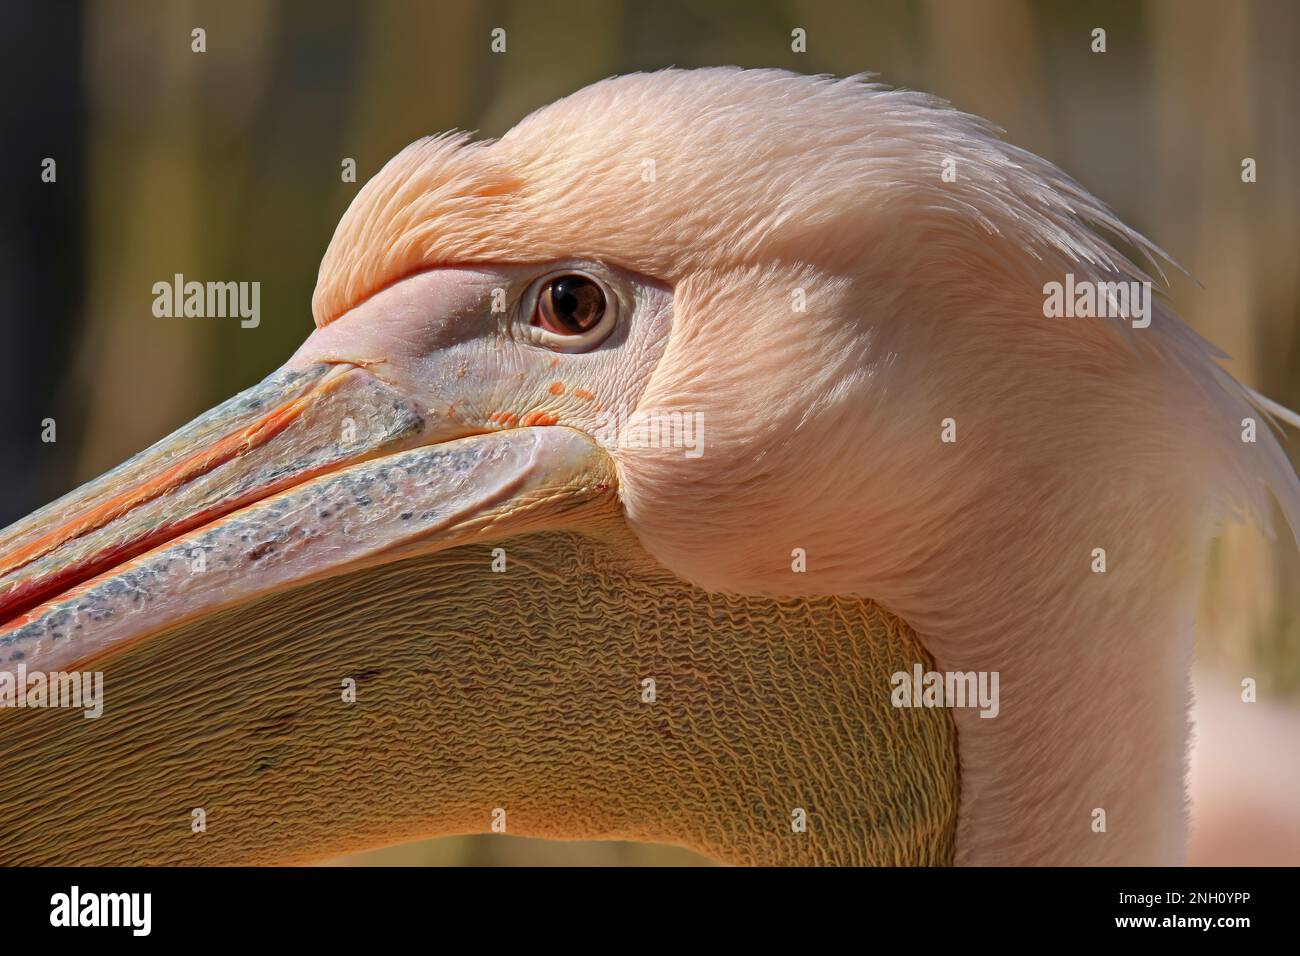 close-up of a pelican's eye and his throat pouch Stock Photo